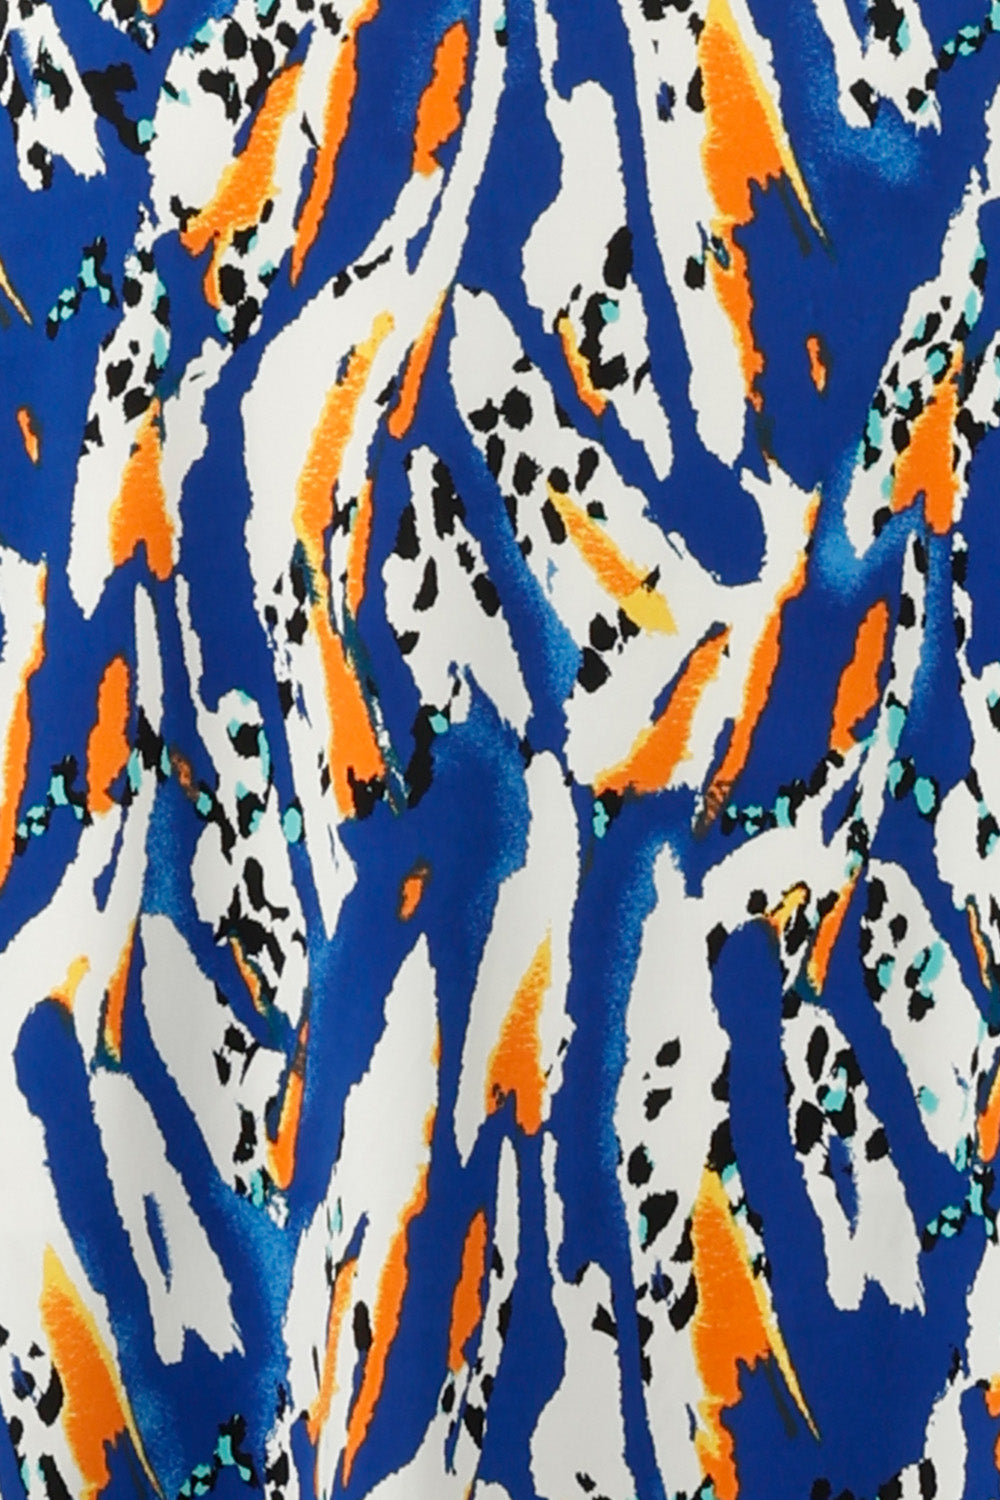 swatch of Australian and New Zealand fashion label L&F's Rockmelon Slinky jersey fabric. An abstract pattern of cobalt, orange, white and yellow used to make women's casual tops and dresses.